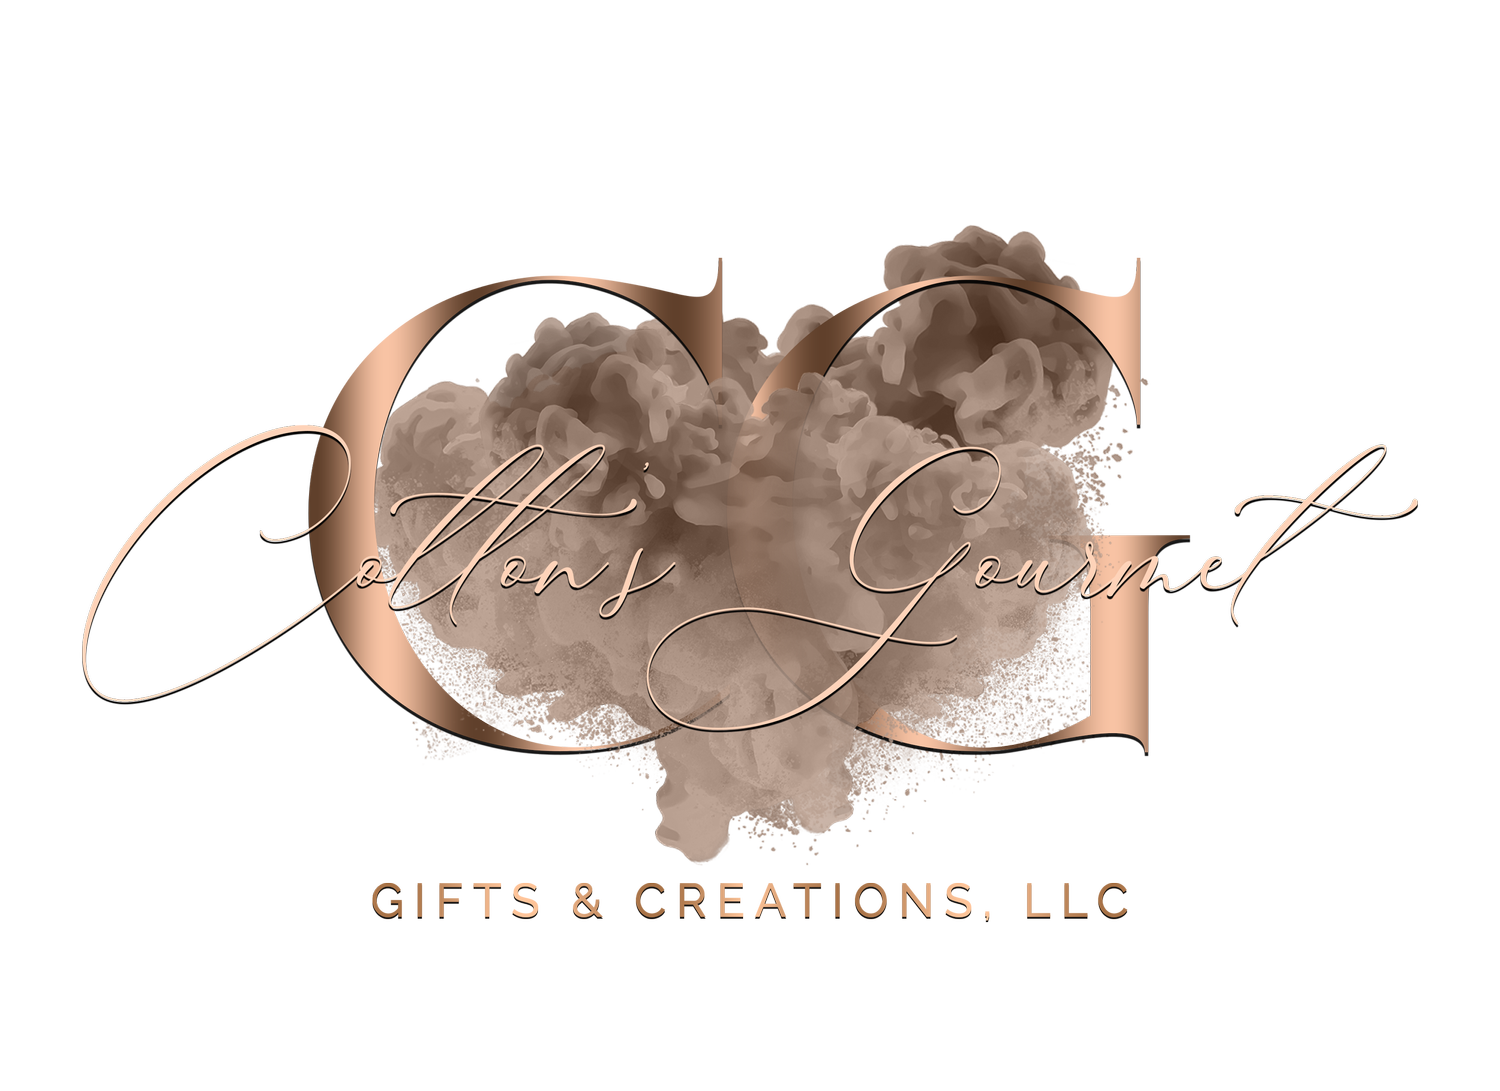 Cotton's Gourmet Gifts & Creations, LLC